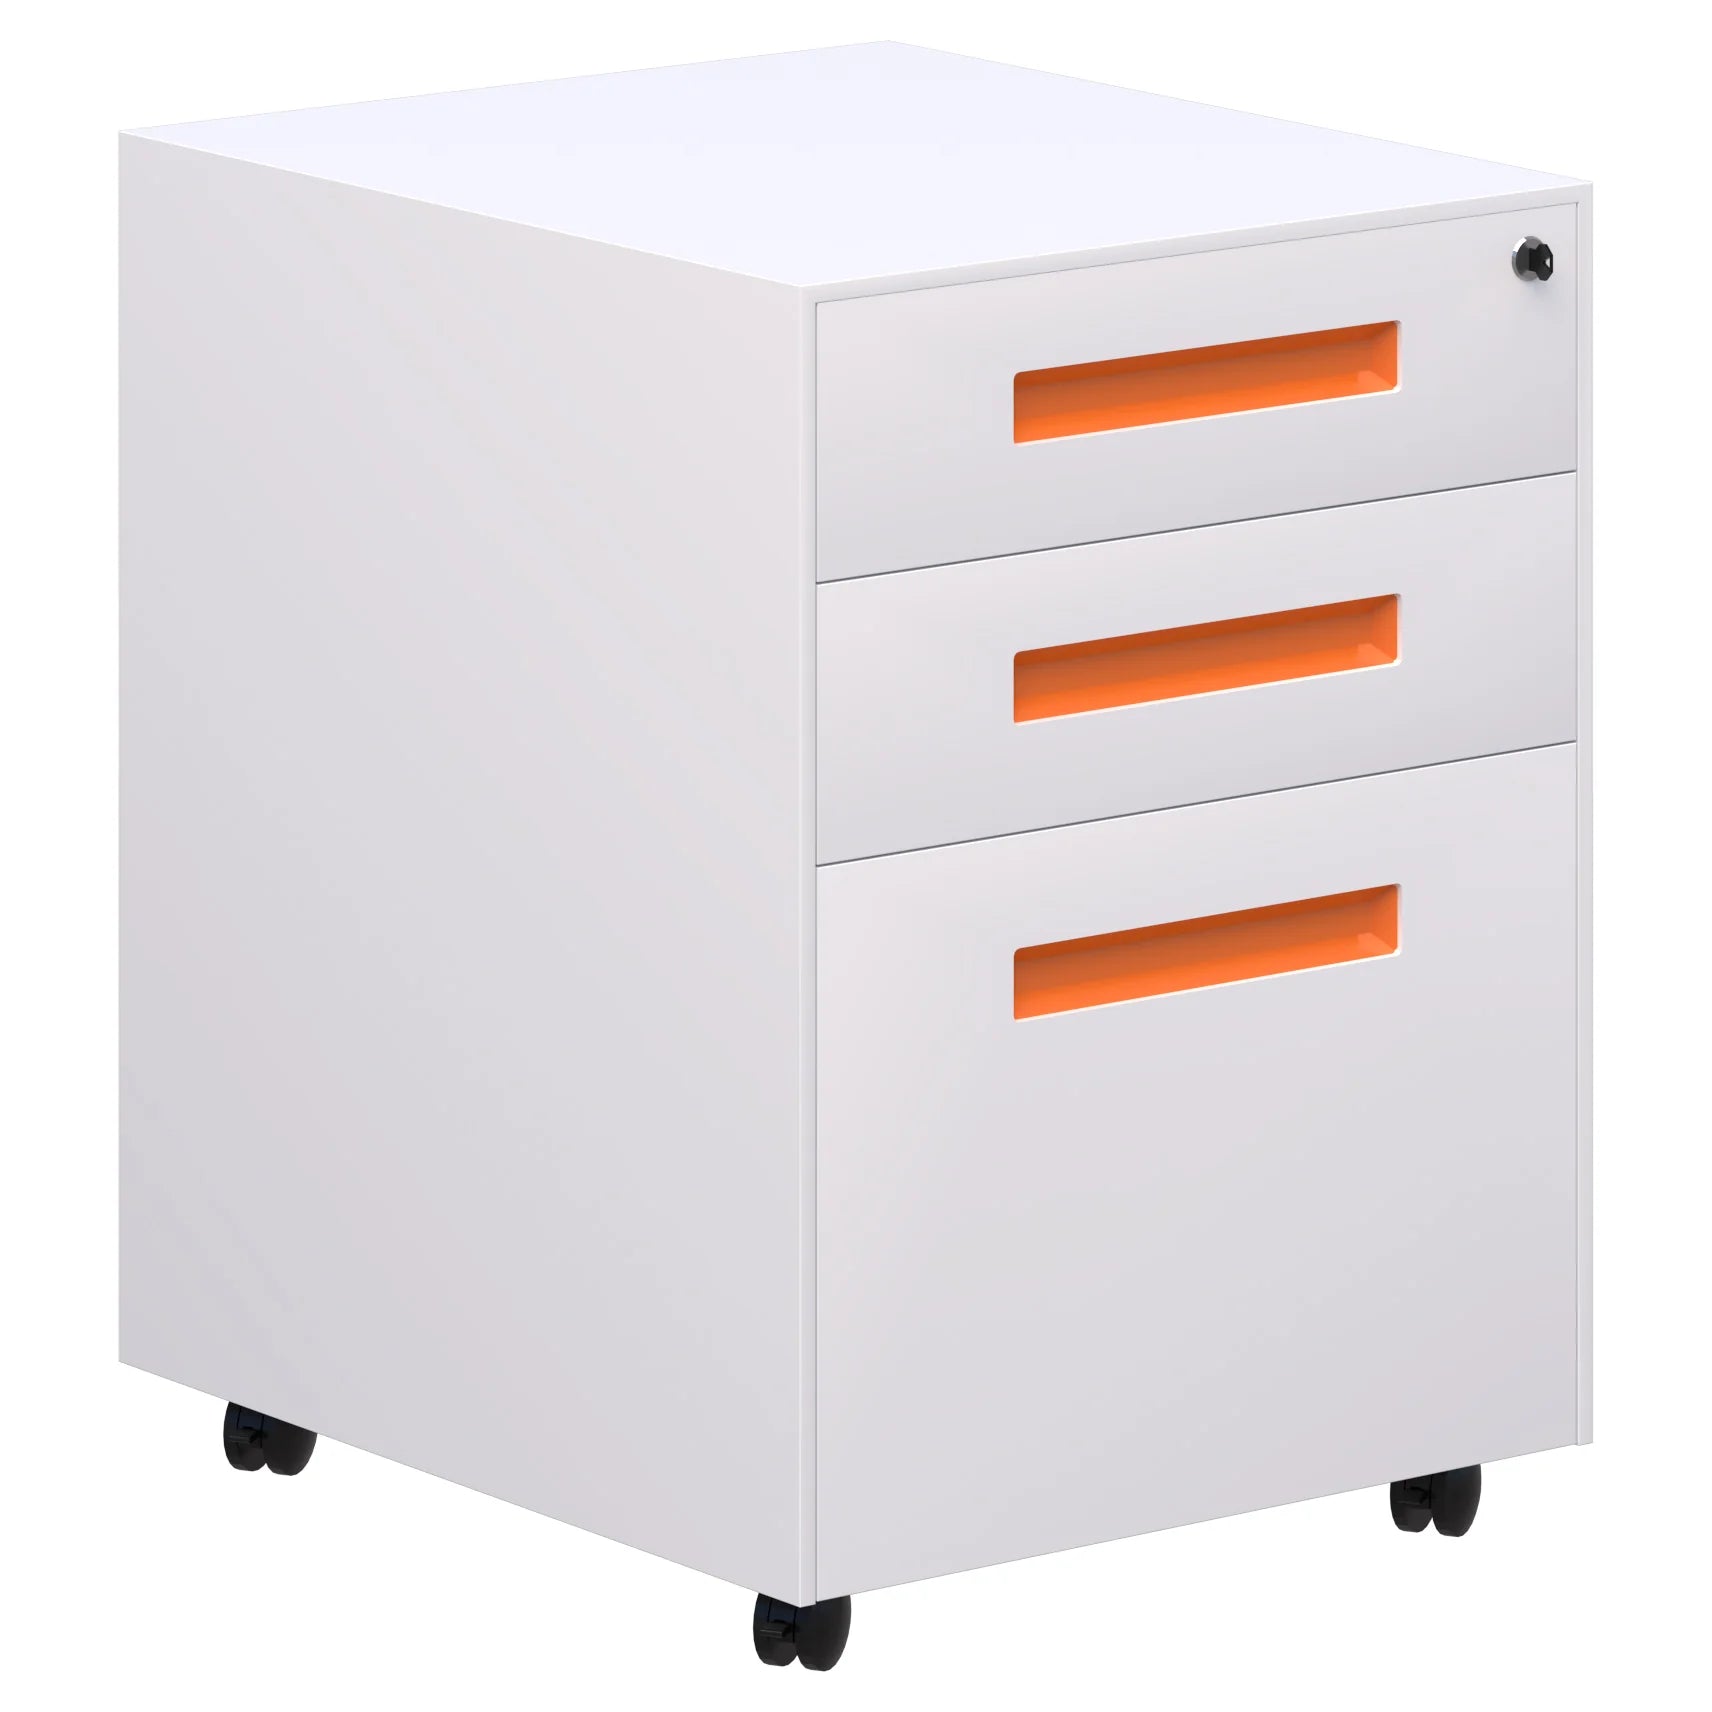 Lockable Spectrum metal mobile with two stationery drawers and 1 file draw in white with orange handles.